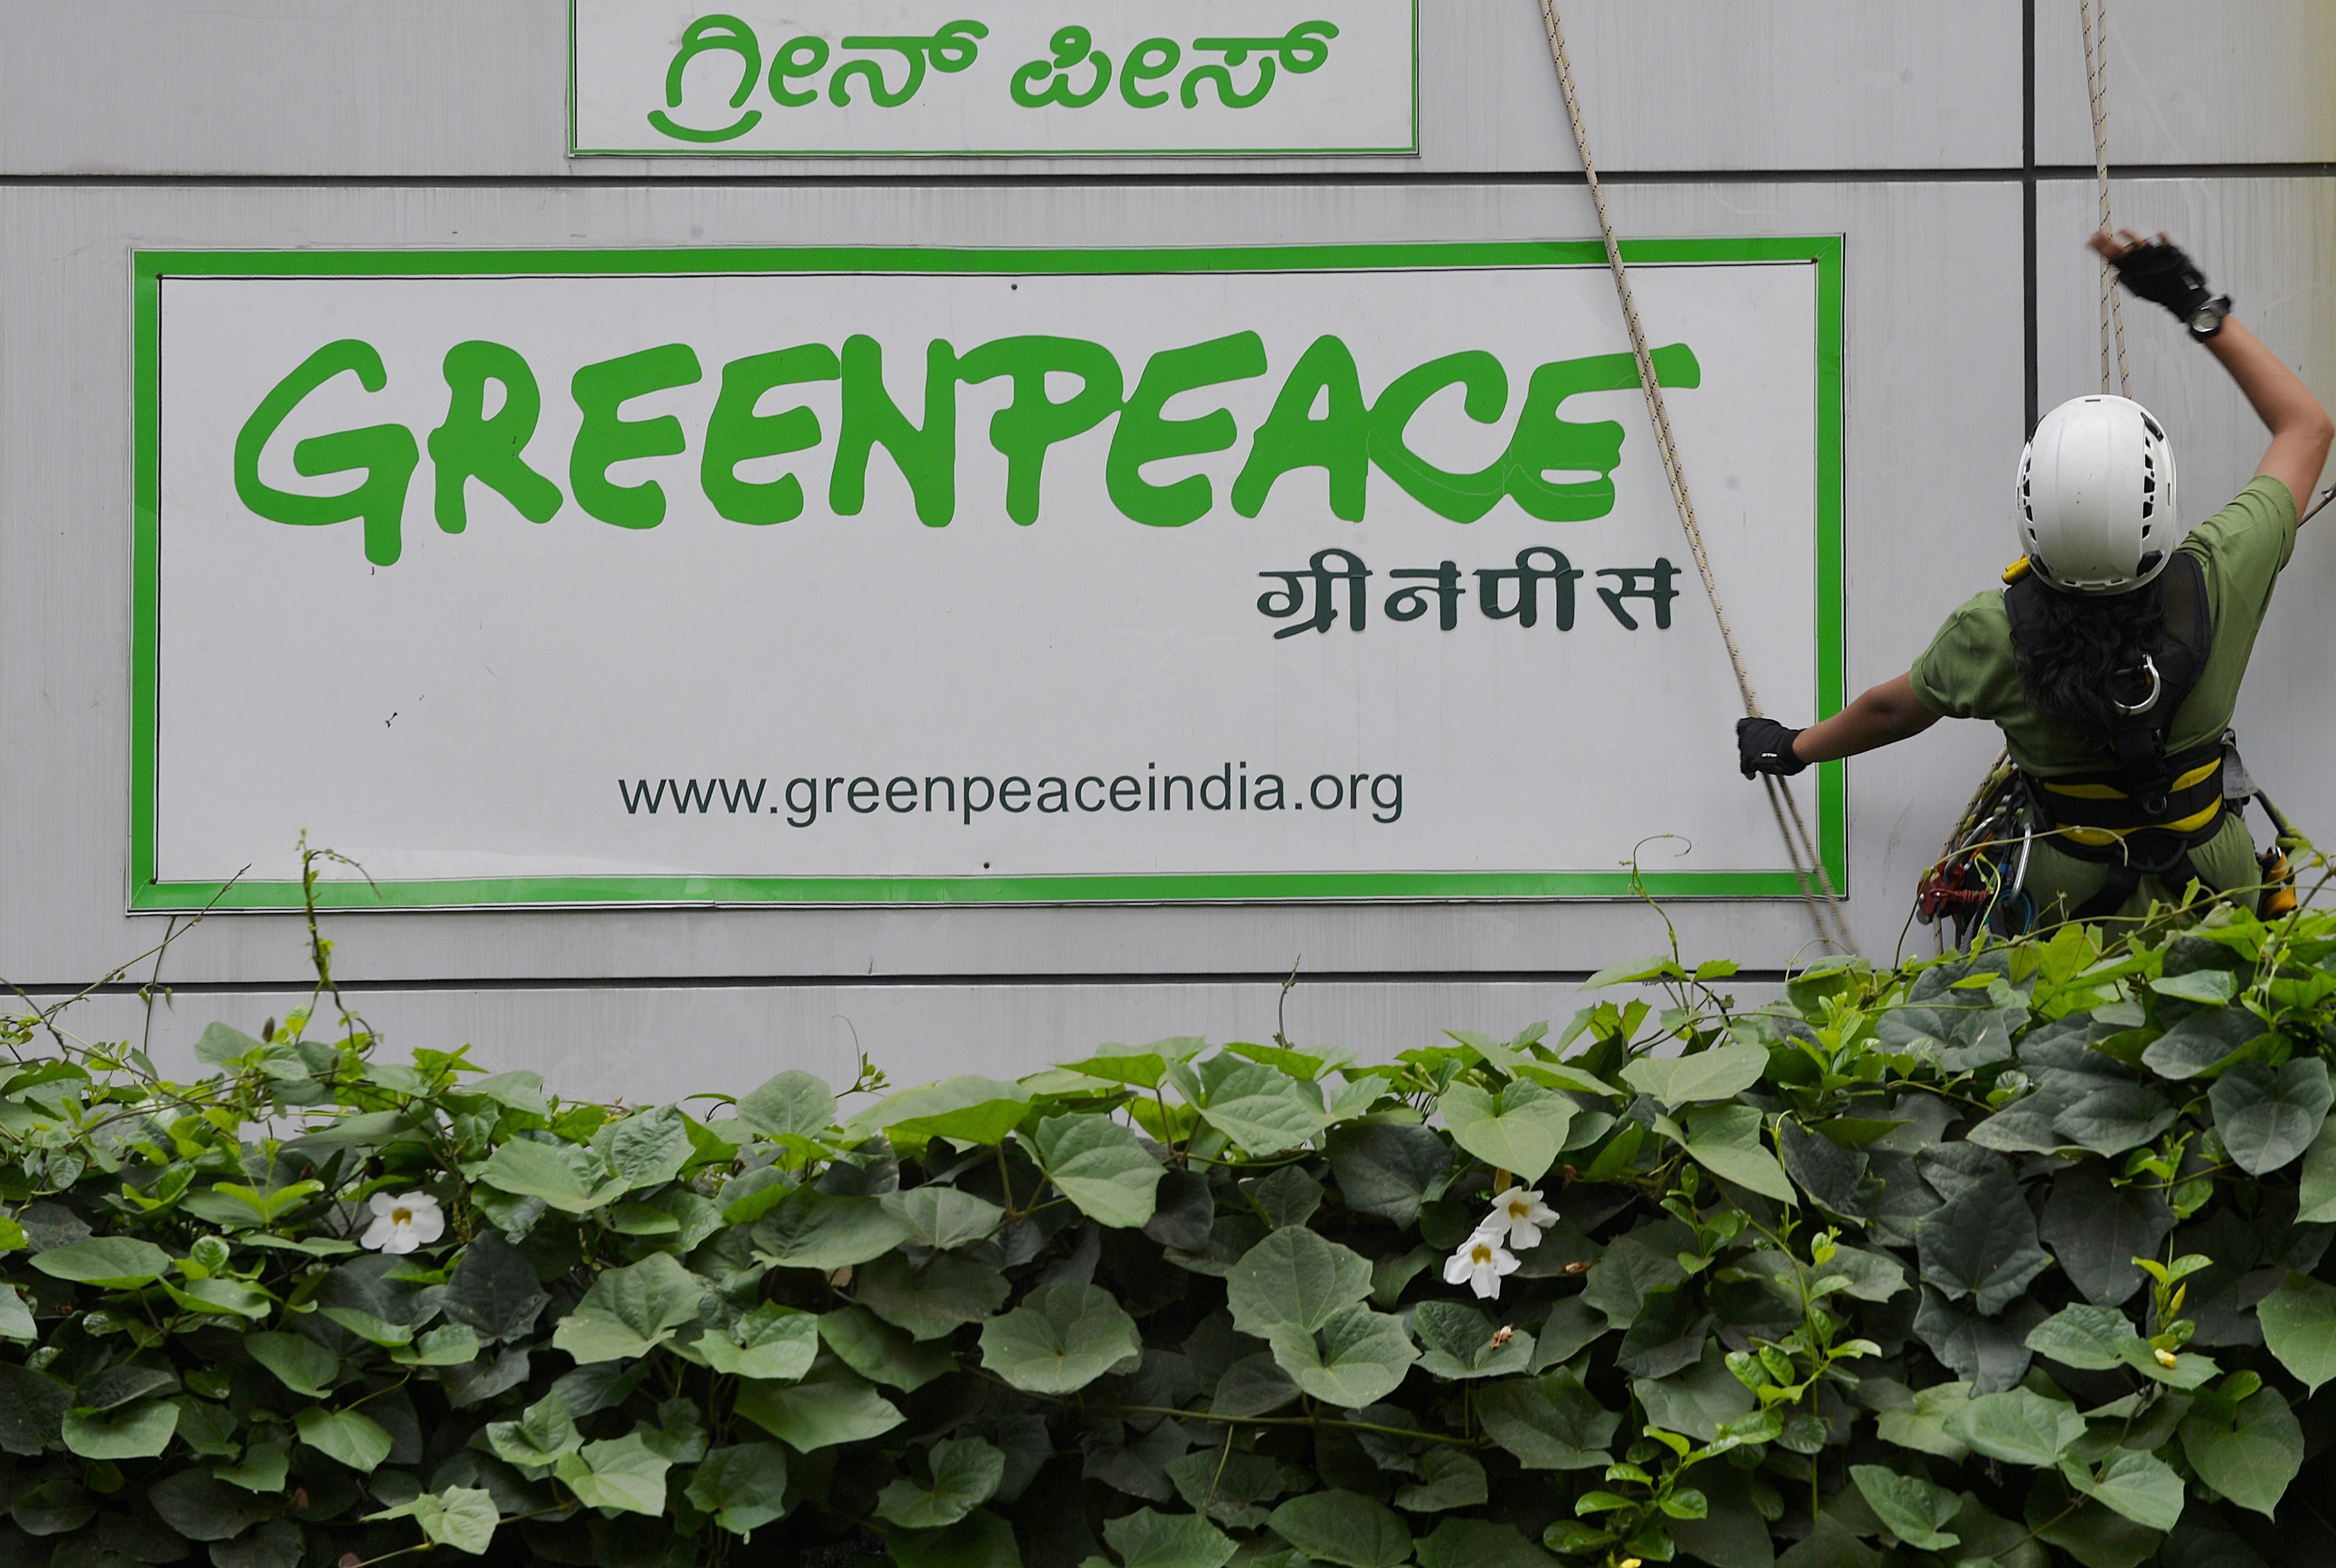 Activists of GreenPeace rappell down the office building where they are headquartered to unfurl banners 'democracy' and 'freespeech' in Bangalore on May 15, 2015. (MANJUNATH KIRAN—AFP/Getty Images)